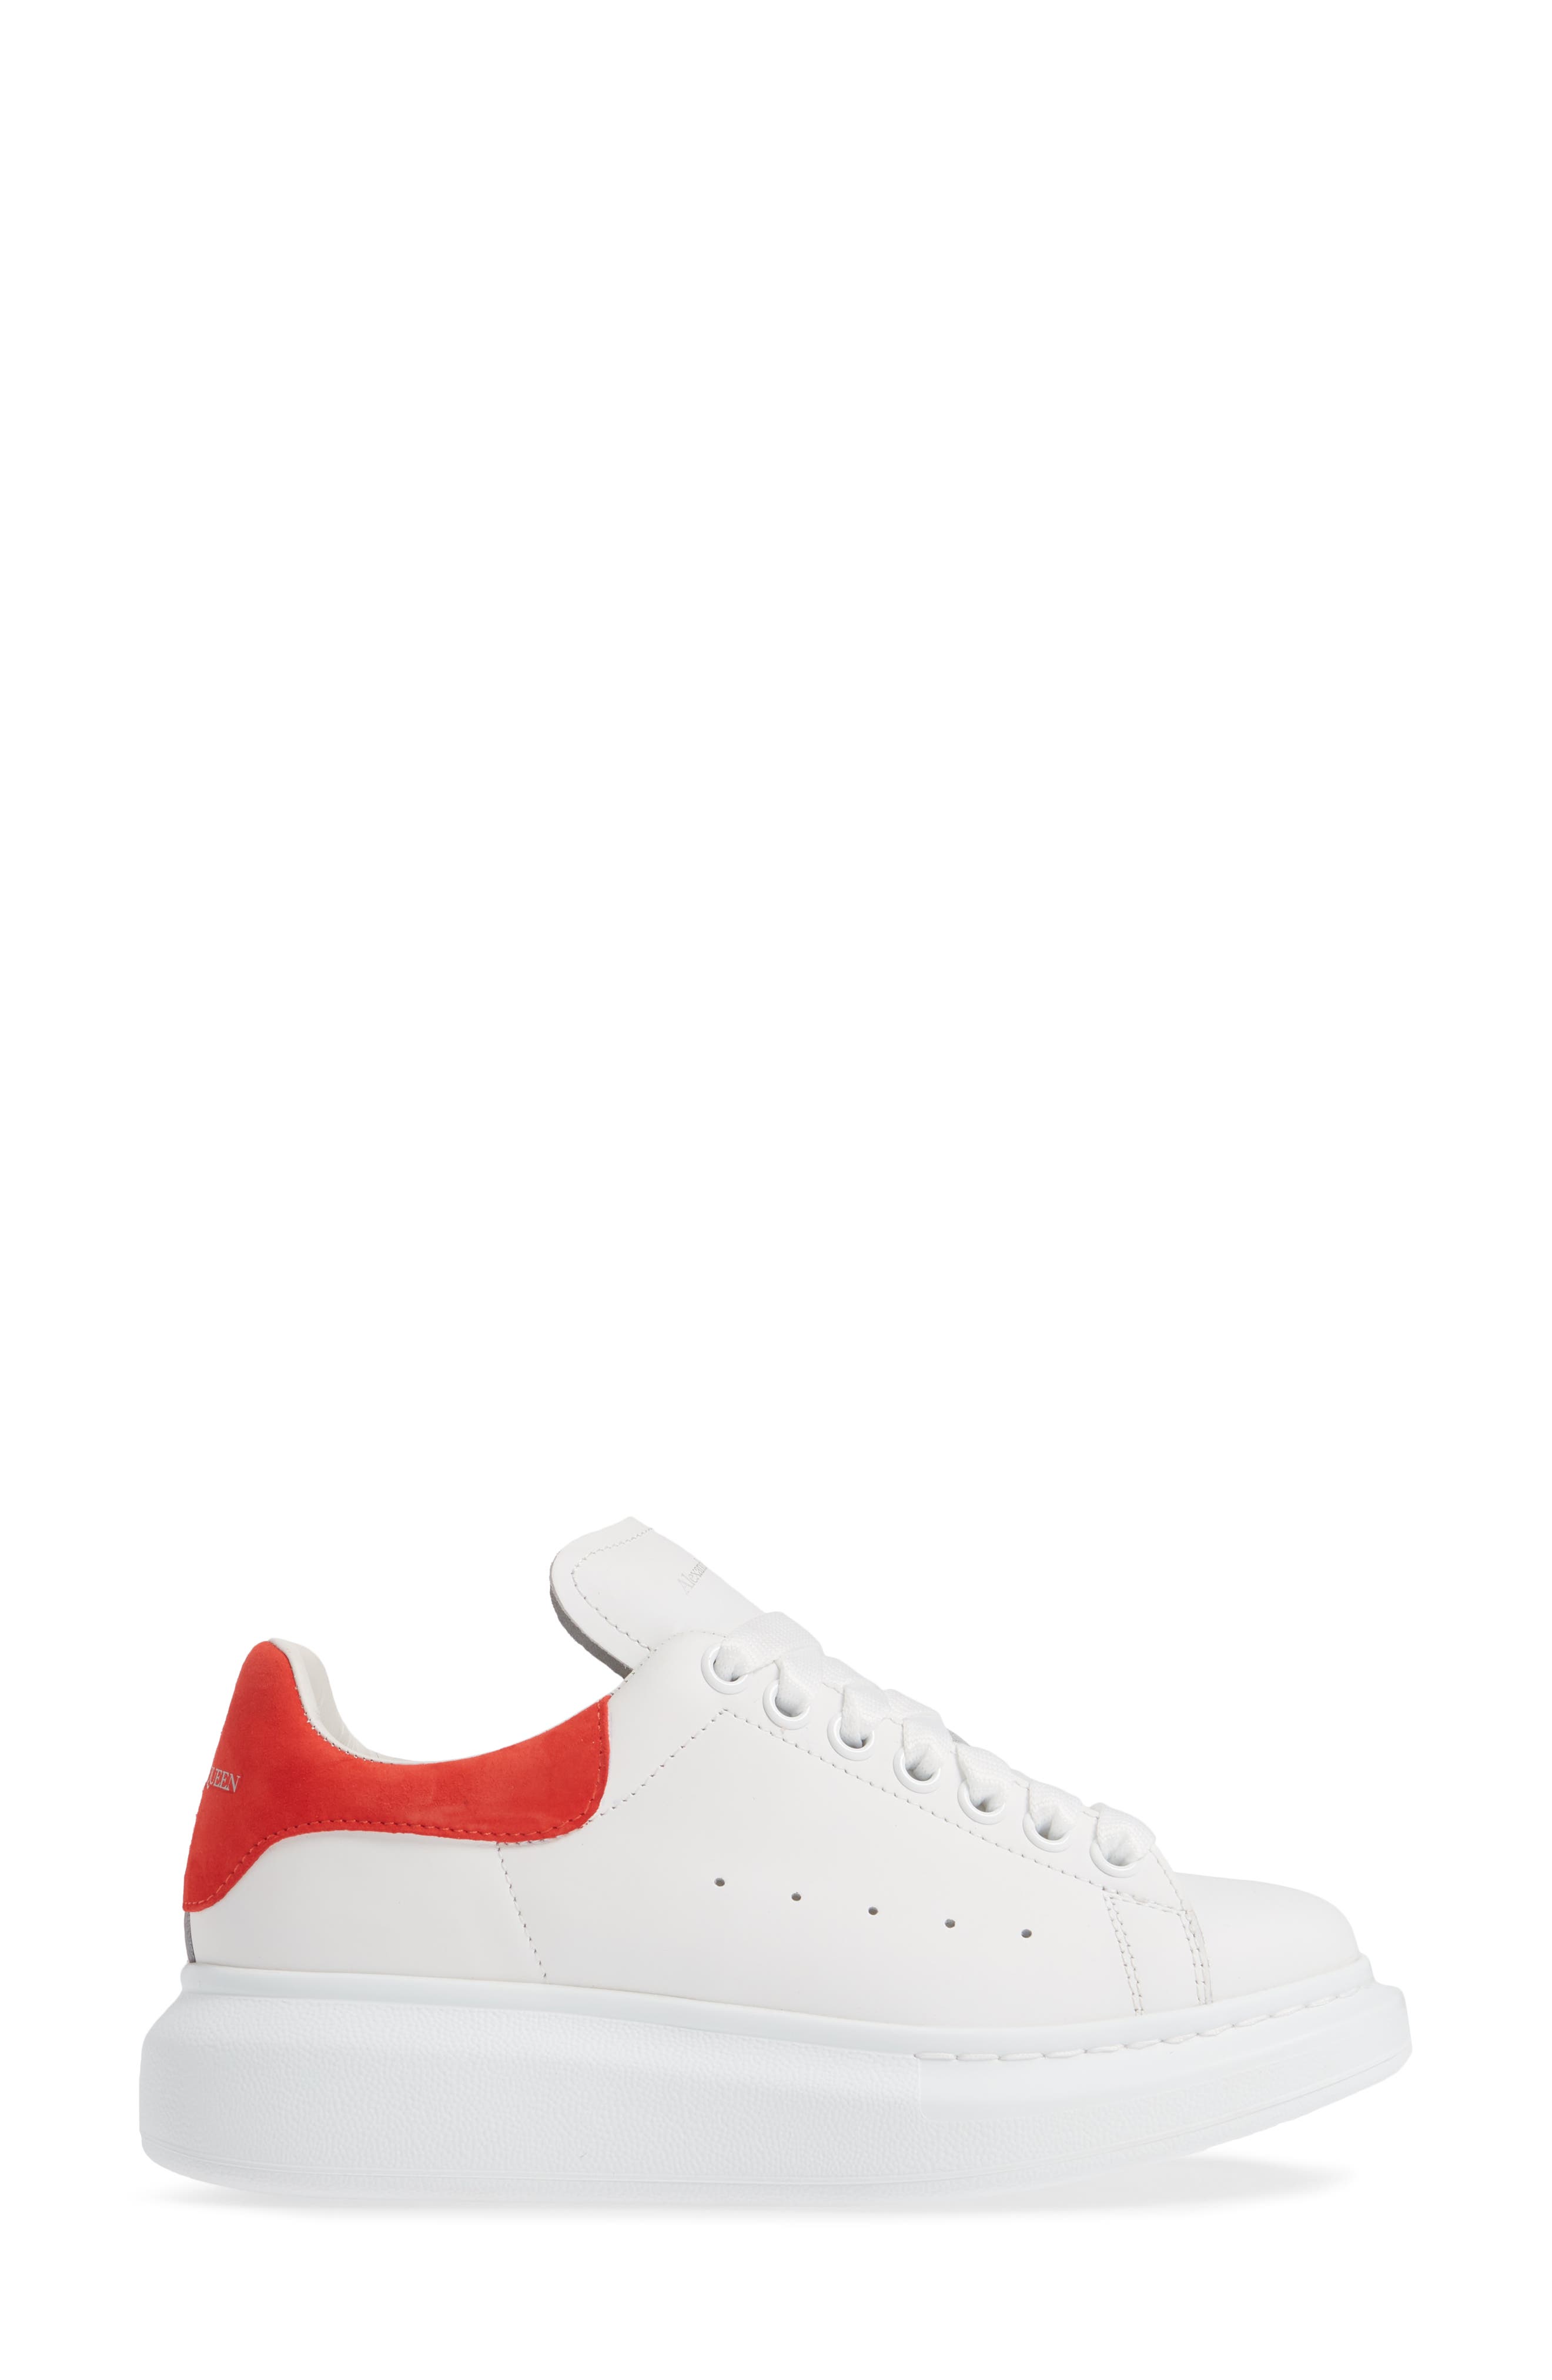 alexander mcqueen shoes all white